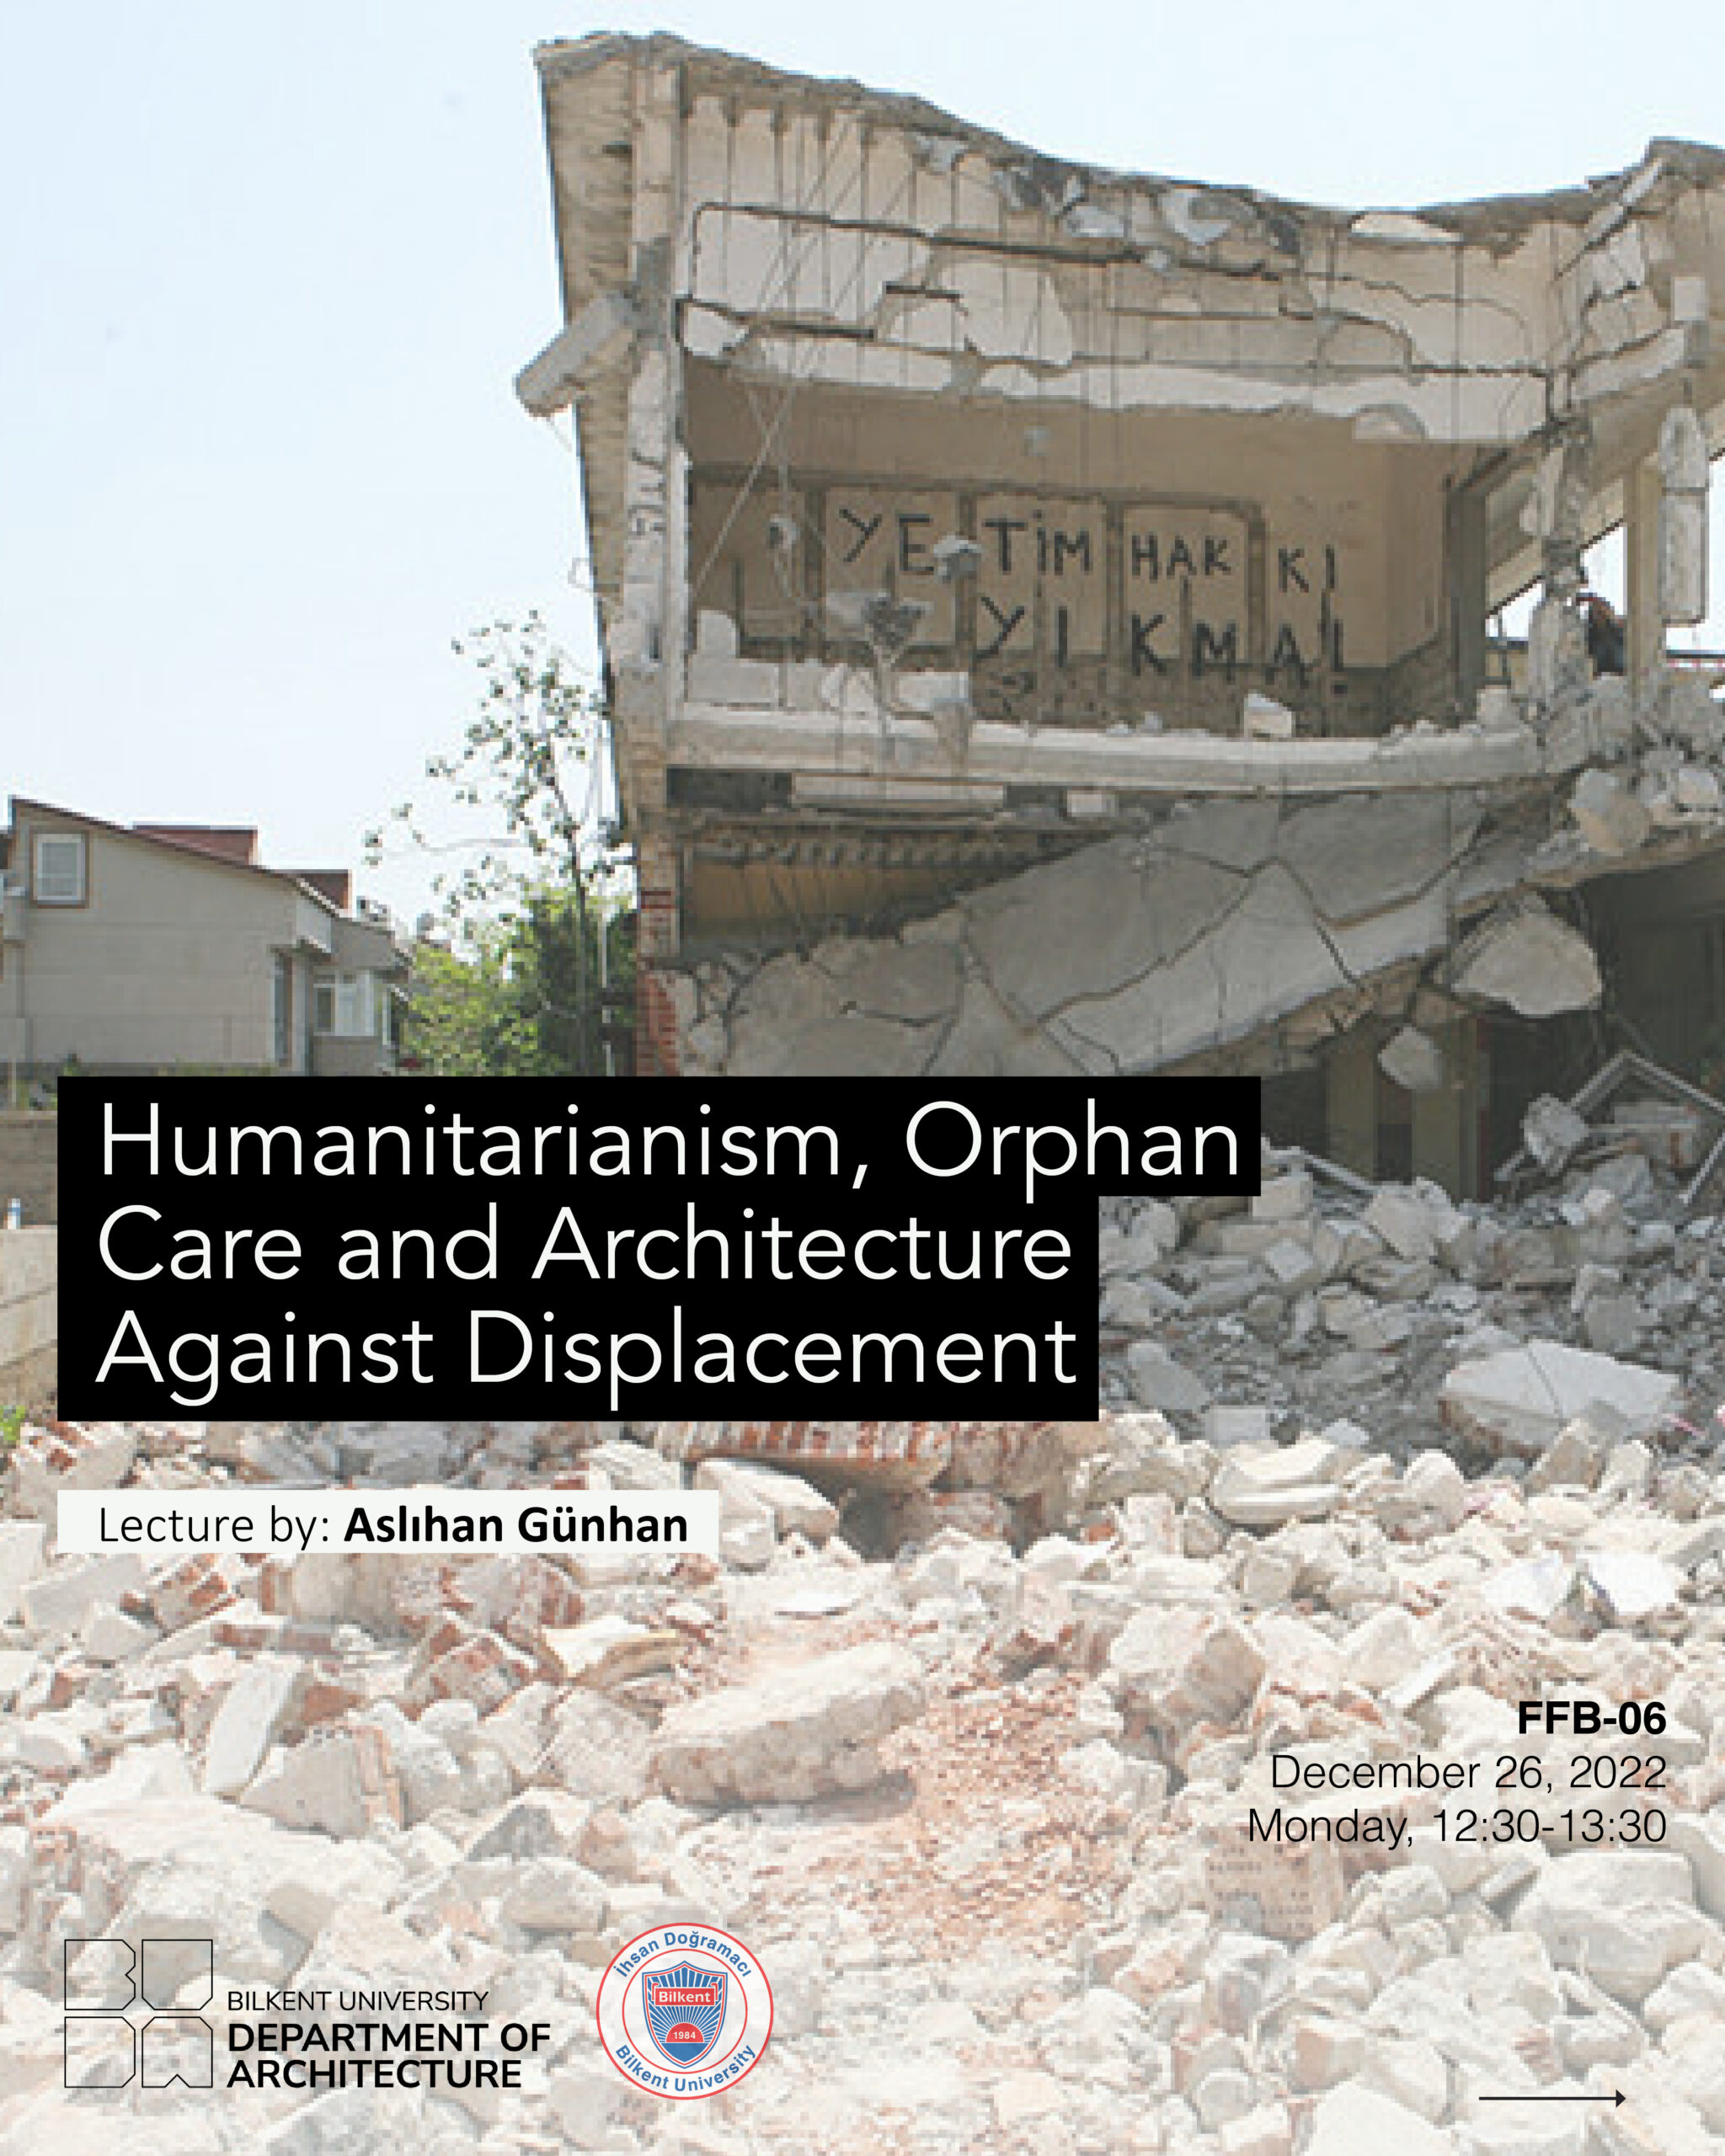 Humanitarianism, Orphan Care and Architecture Against Displacement